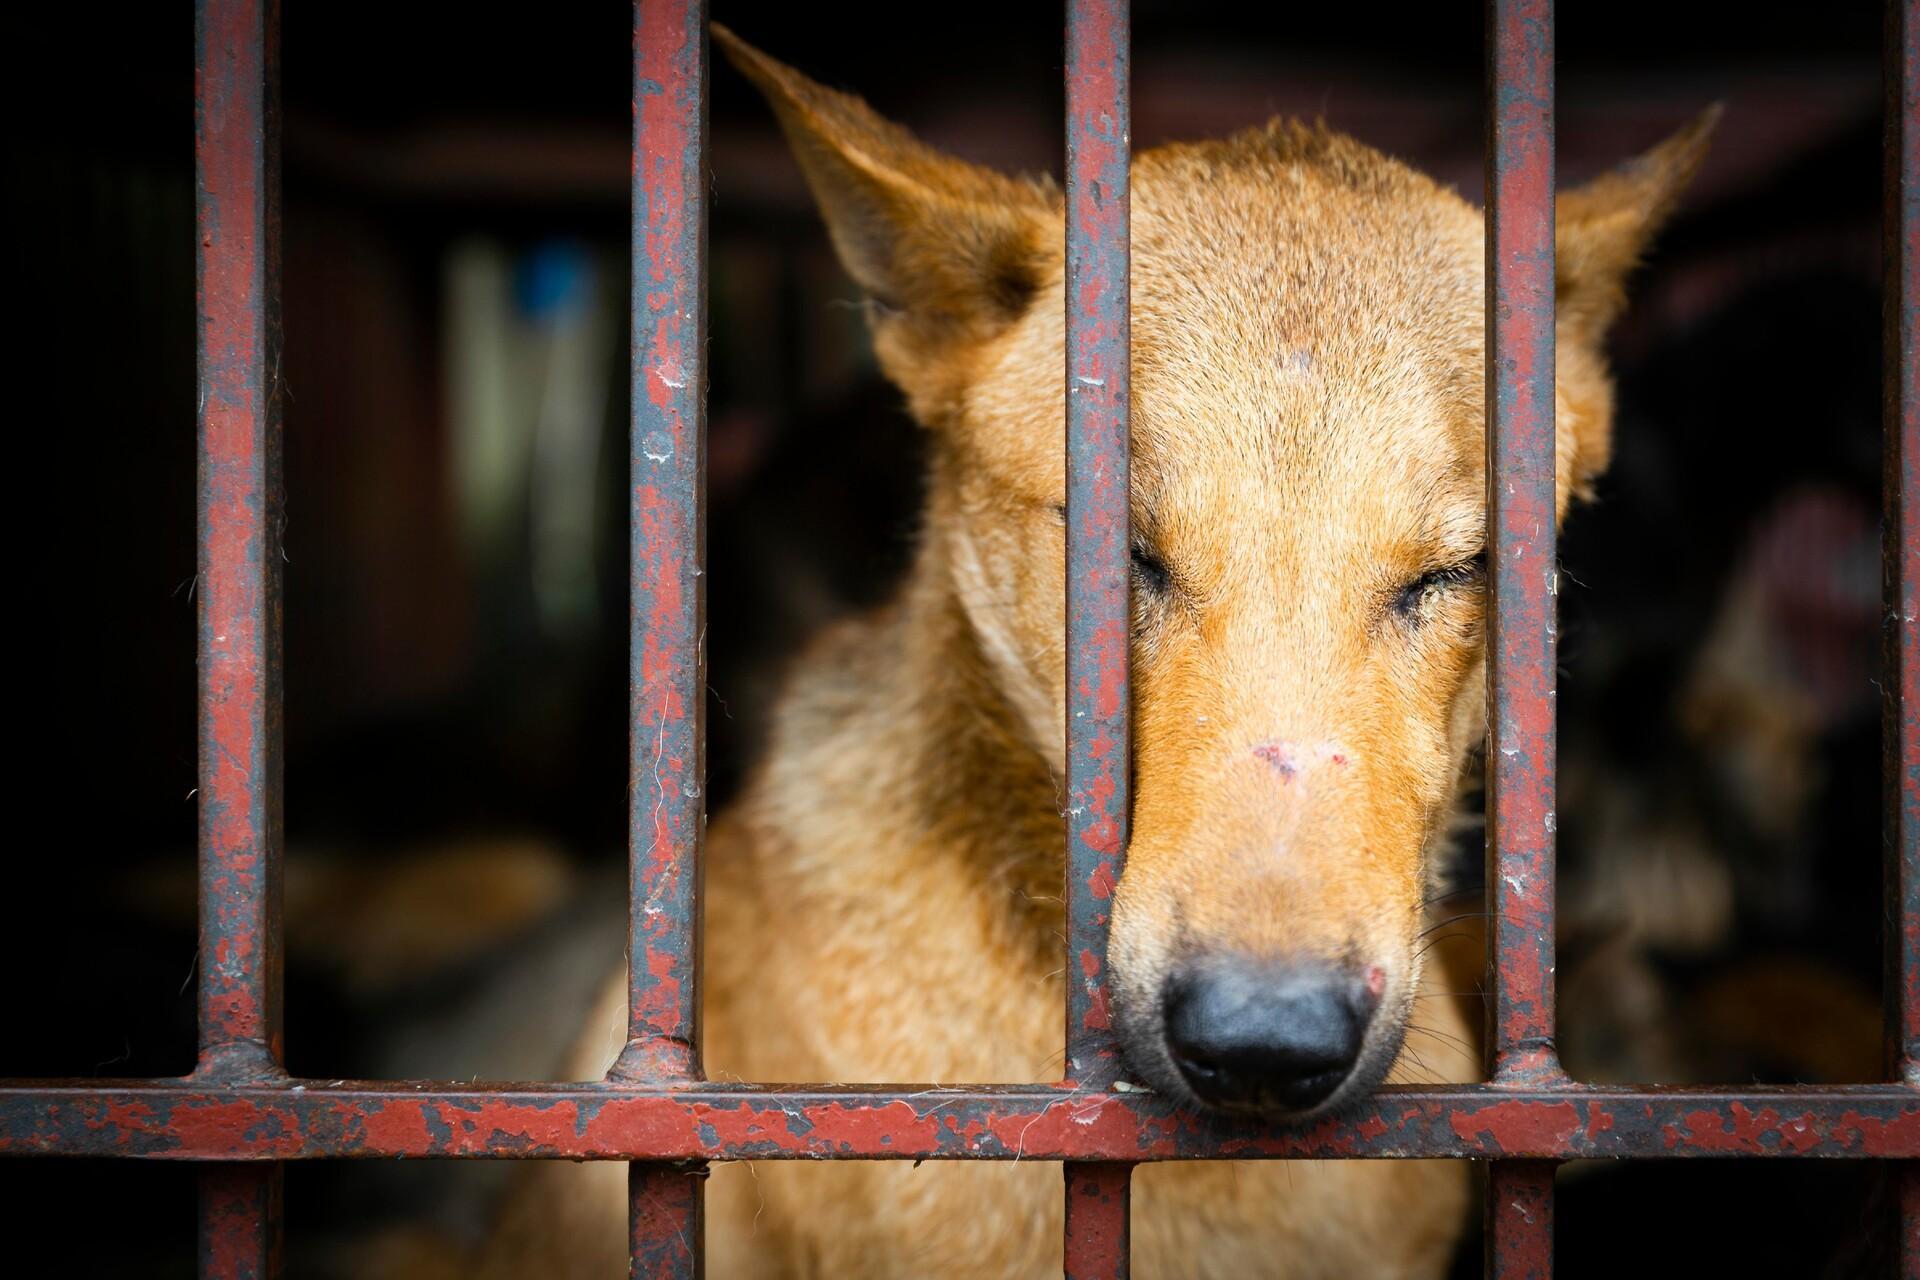 Dog in a cage in Southeast Asia